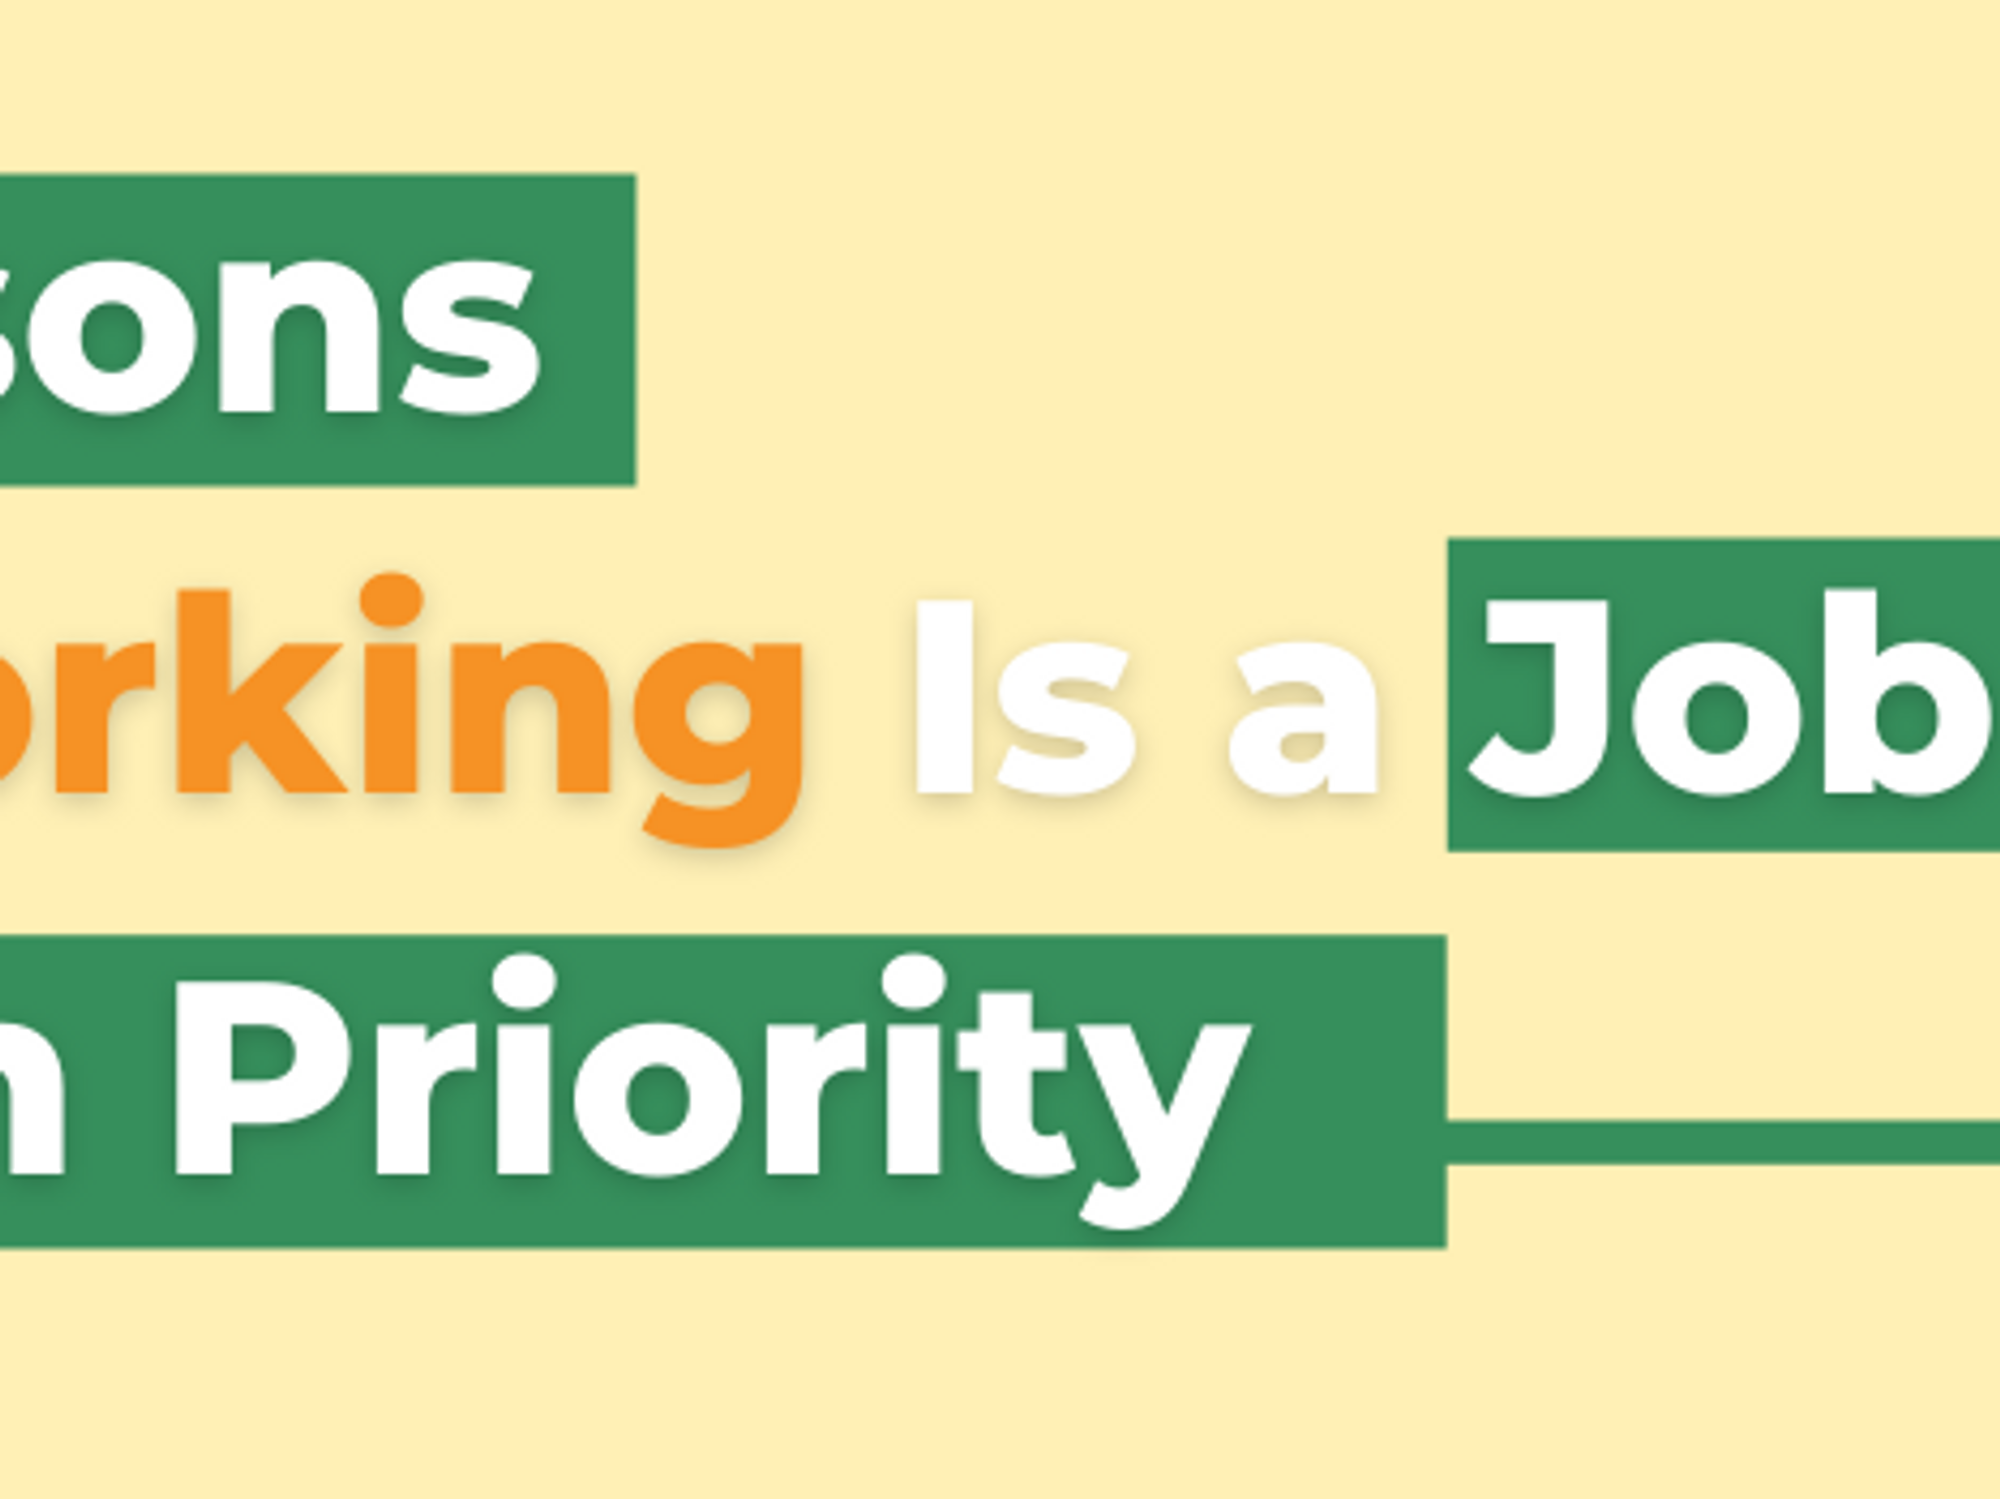 Reasons why networking is a job search priority